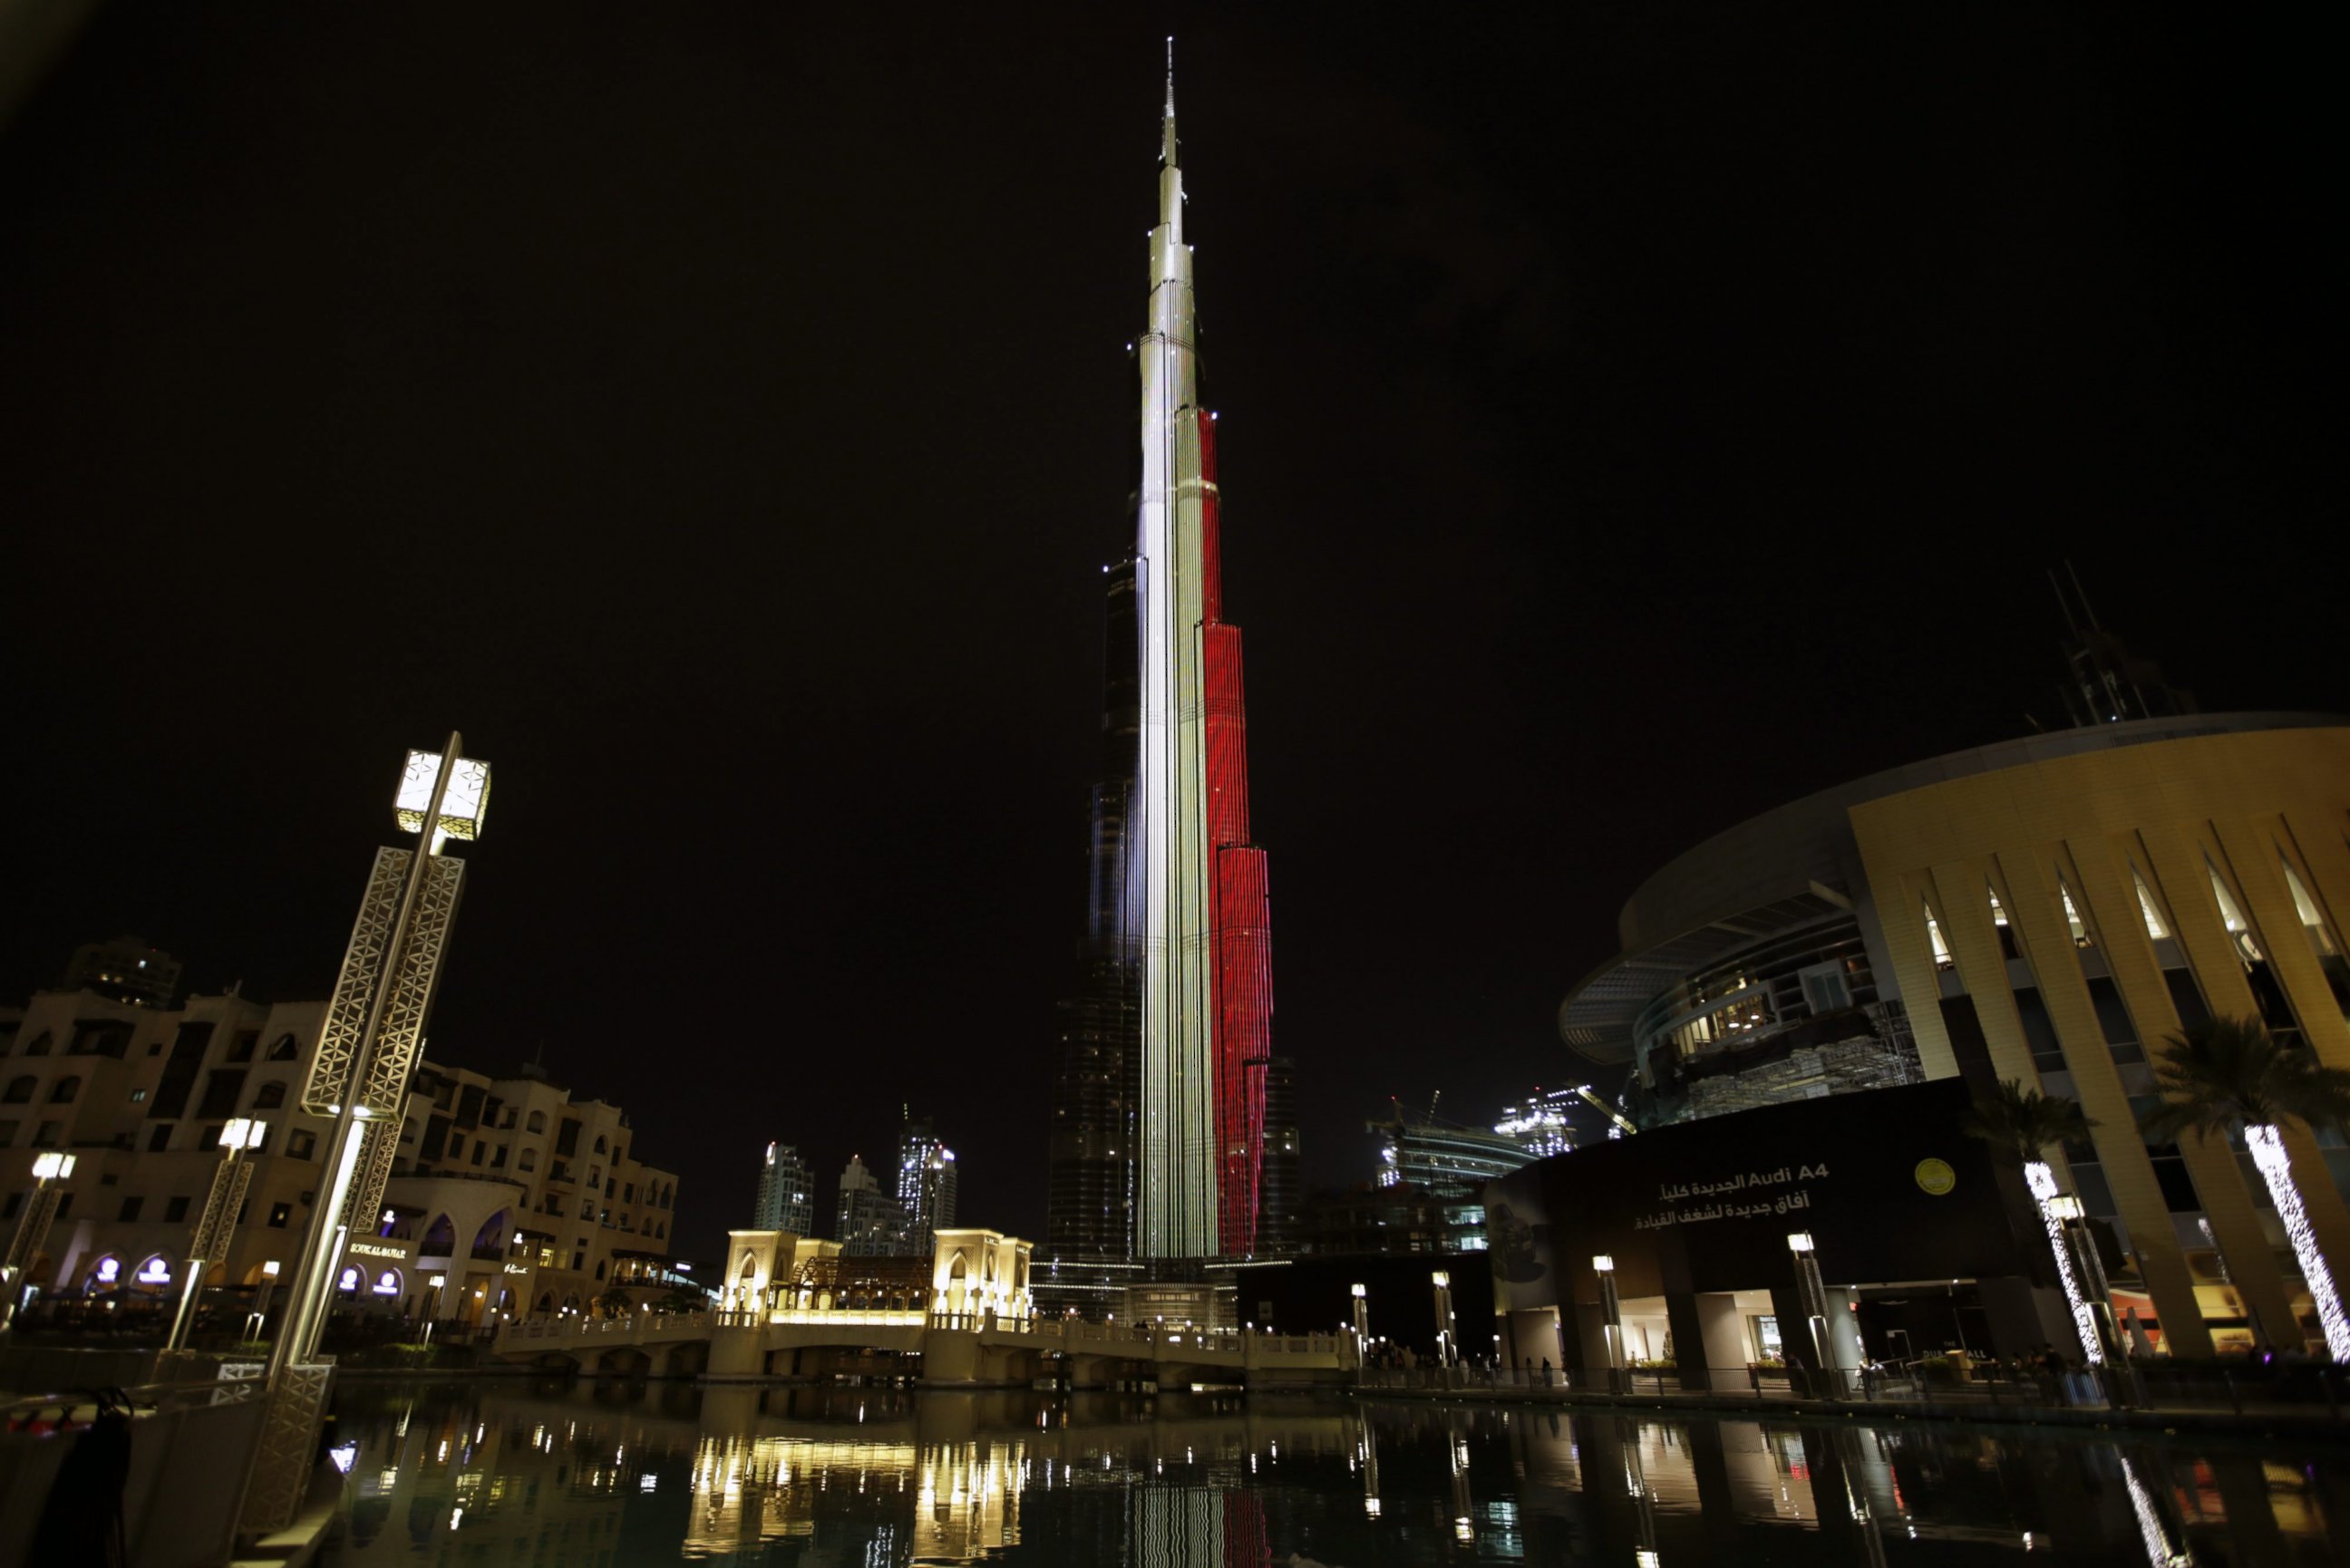 PHOTO: The Burj Khalifa in Dubak, United Arab Emirates, is illuminated in the colours of the Belgian flag to show solidarity after the terrorist operations in Brussels, March 22, 2016.